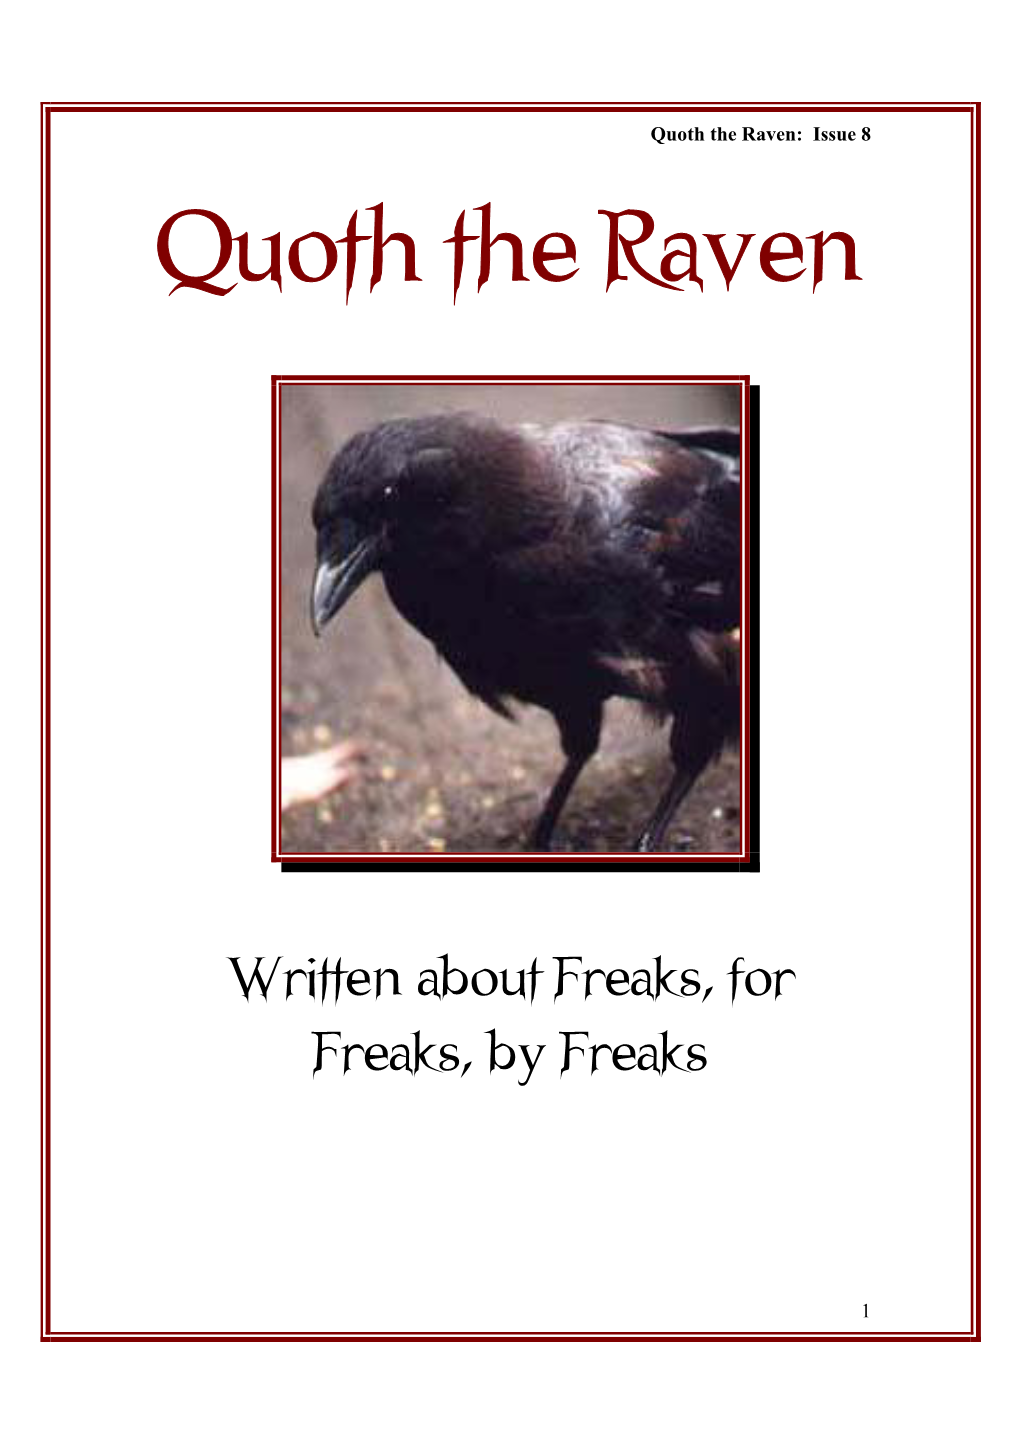 Quoth the Raven: Issue 8 Quoth the Raven